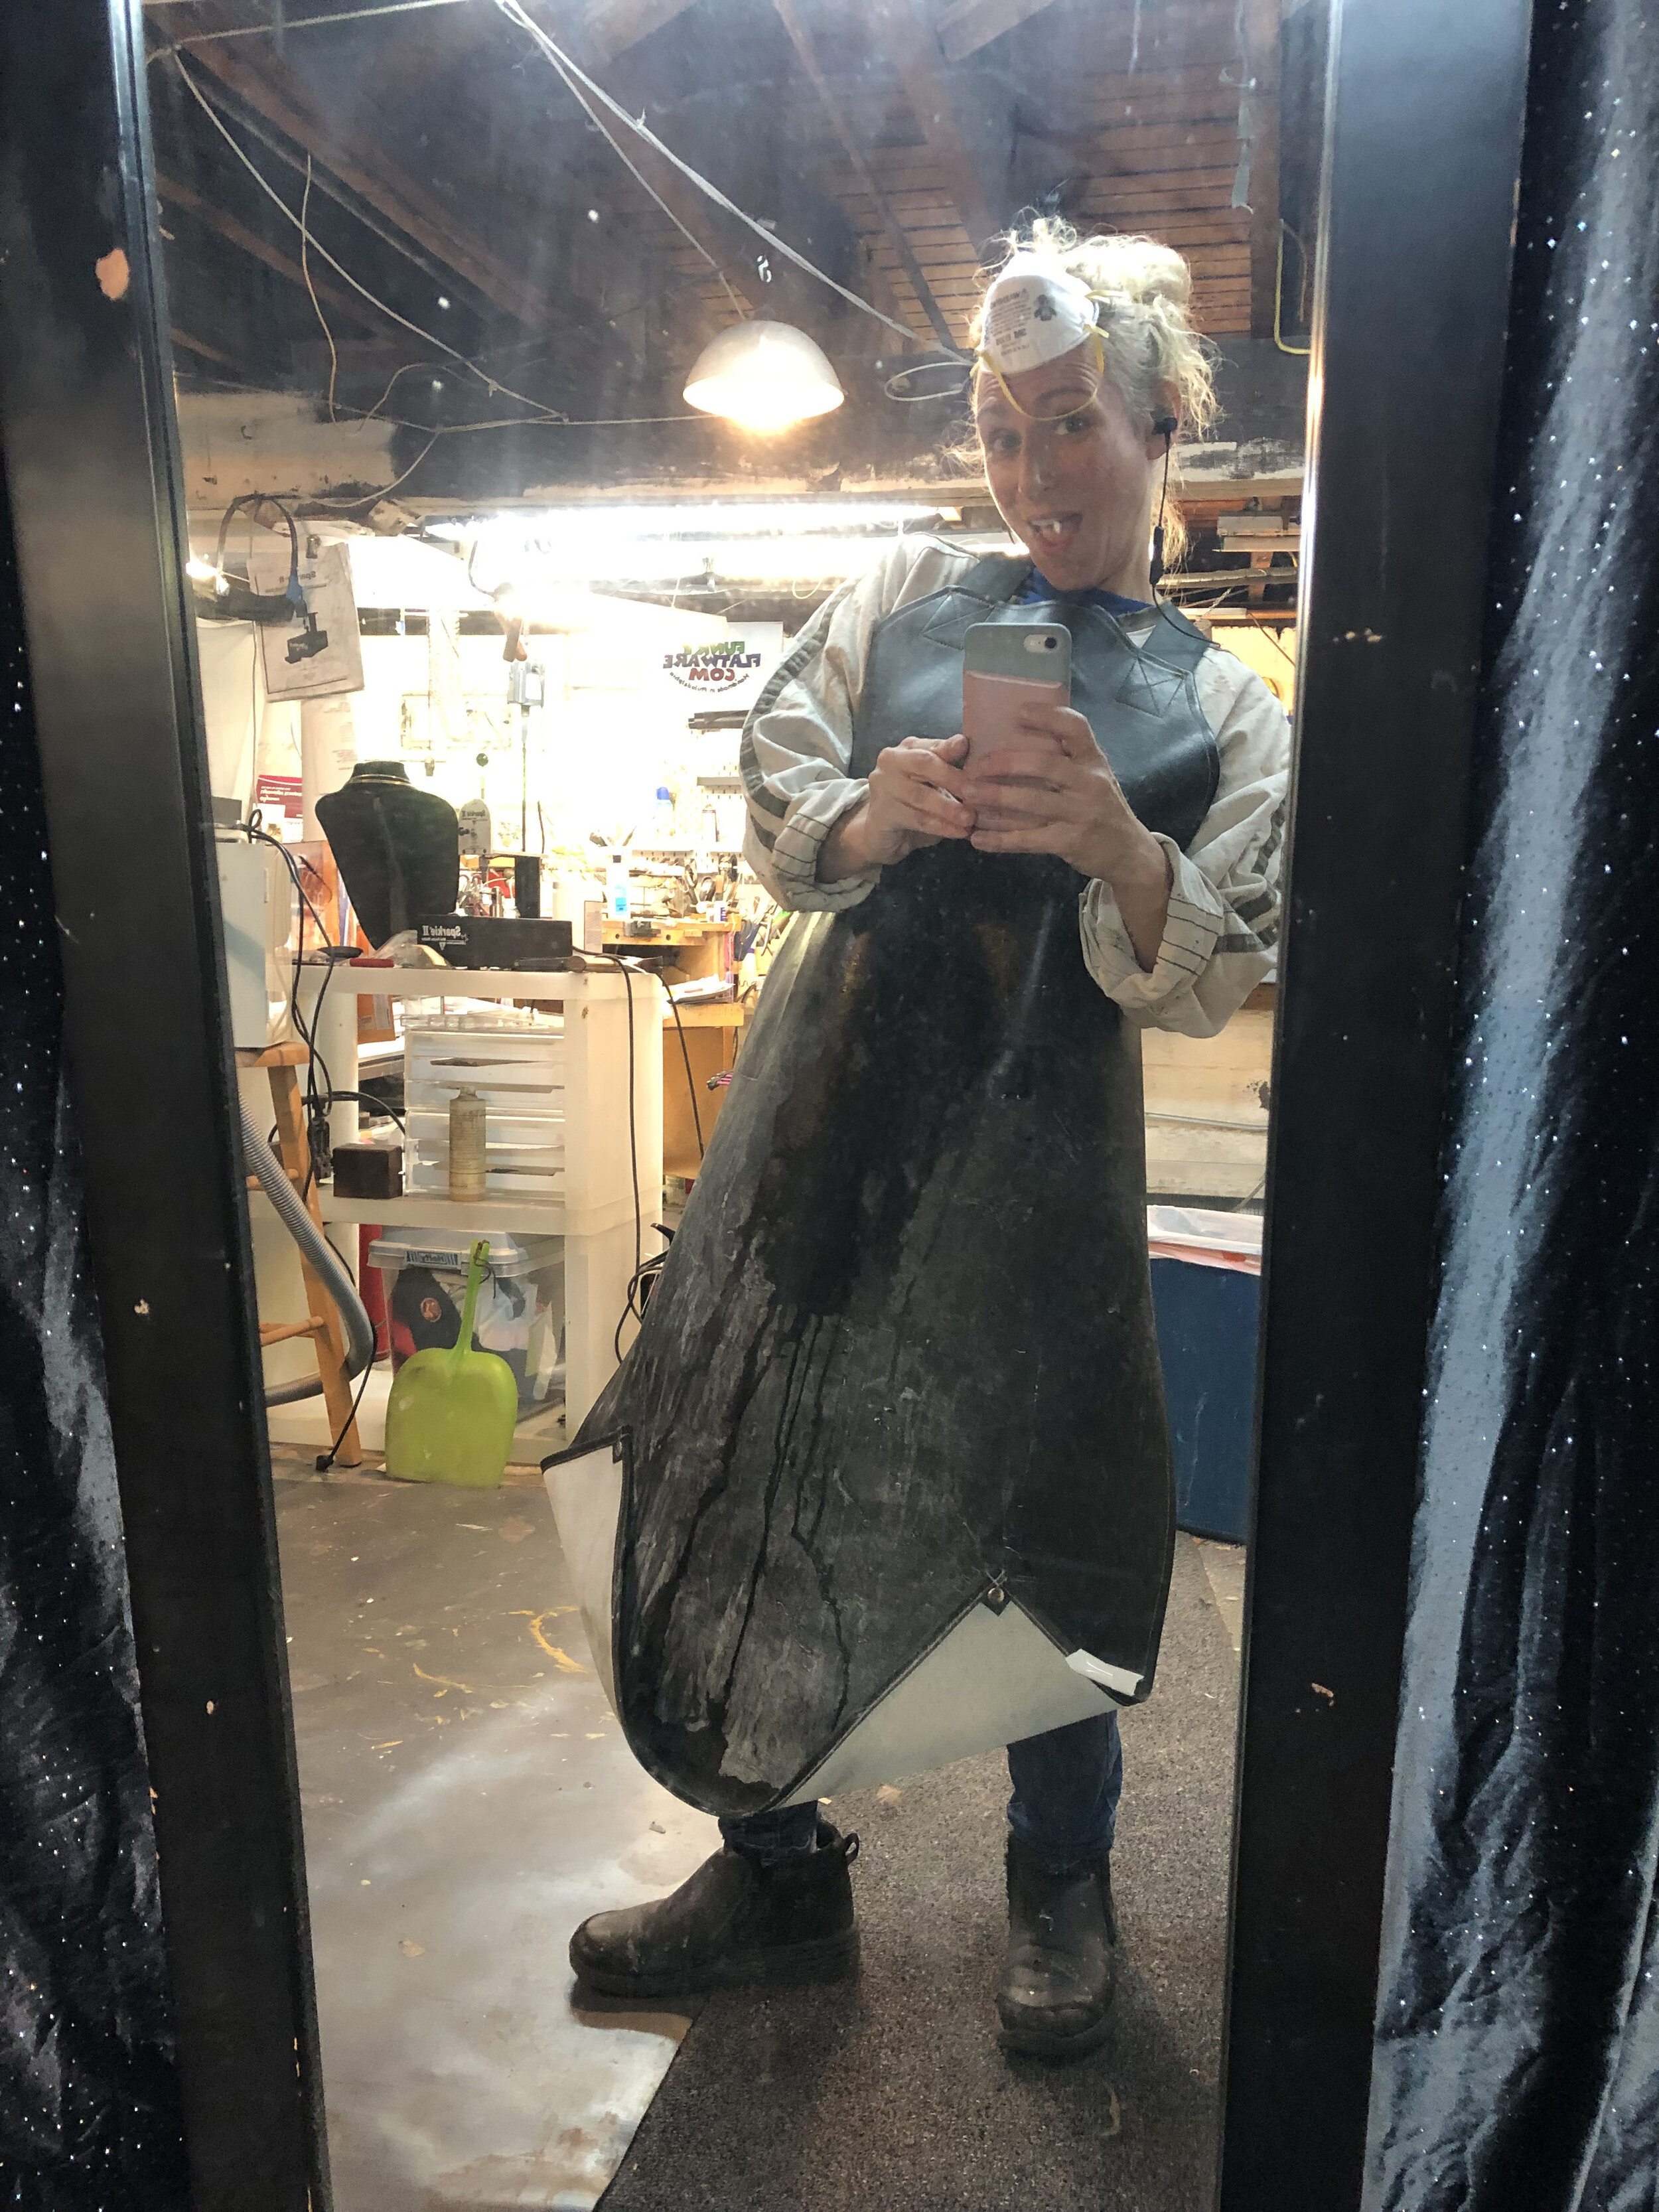 I wear a stylish rubber apron while I work with the glass as well as rubber boots because my process involves a lot of water to keep the glass cool.